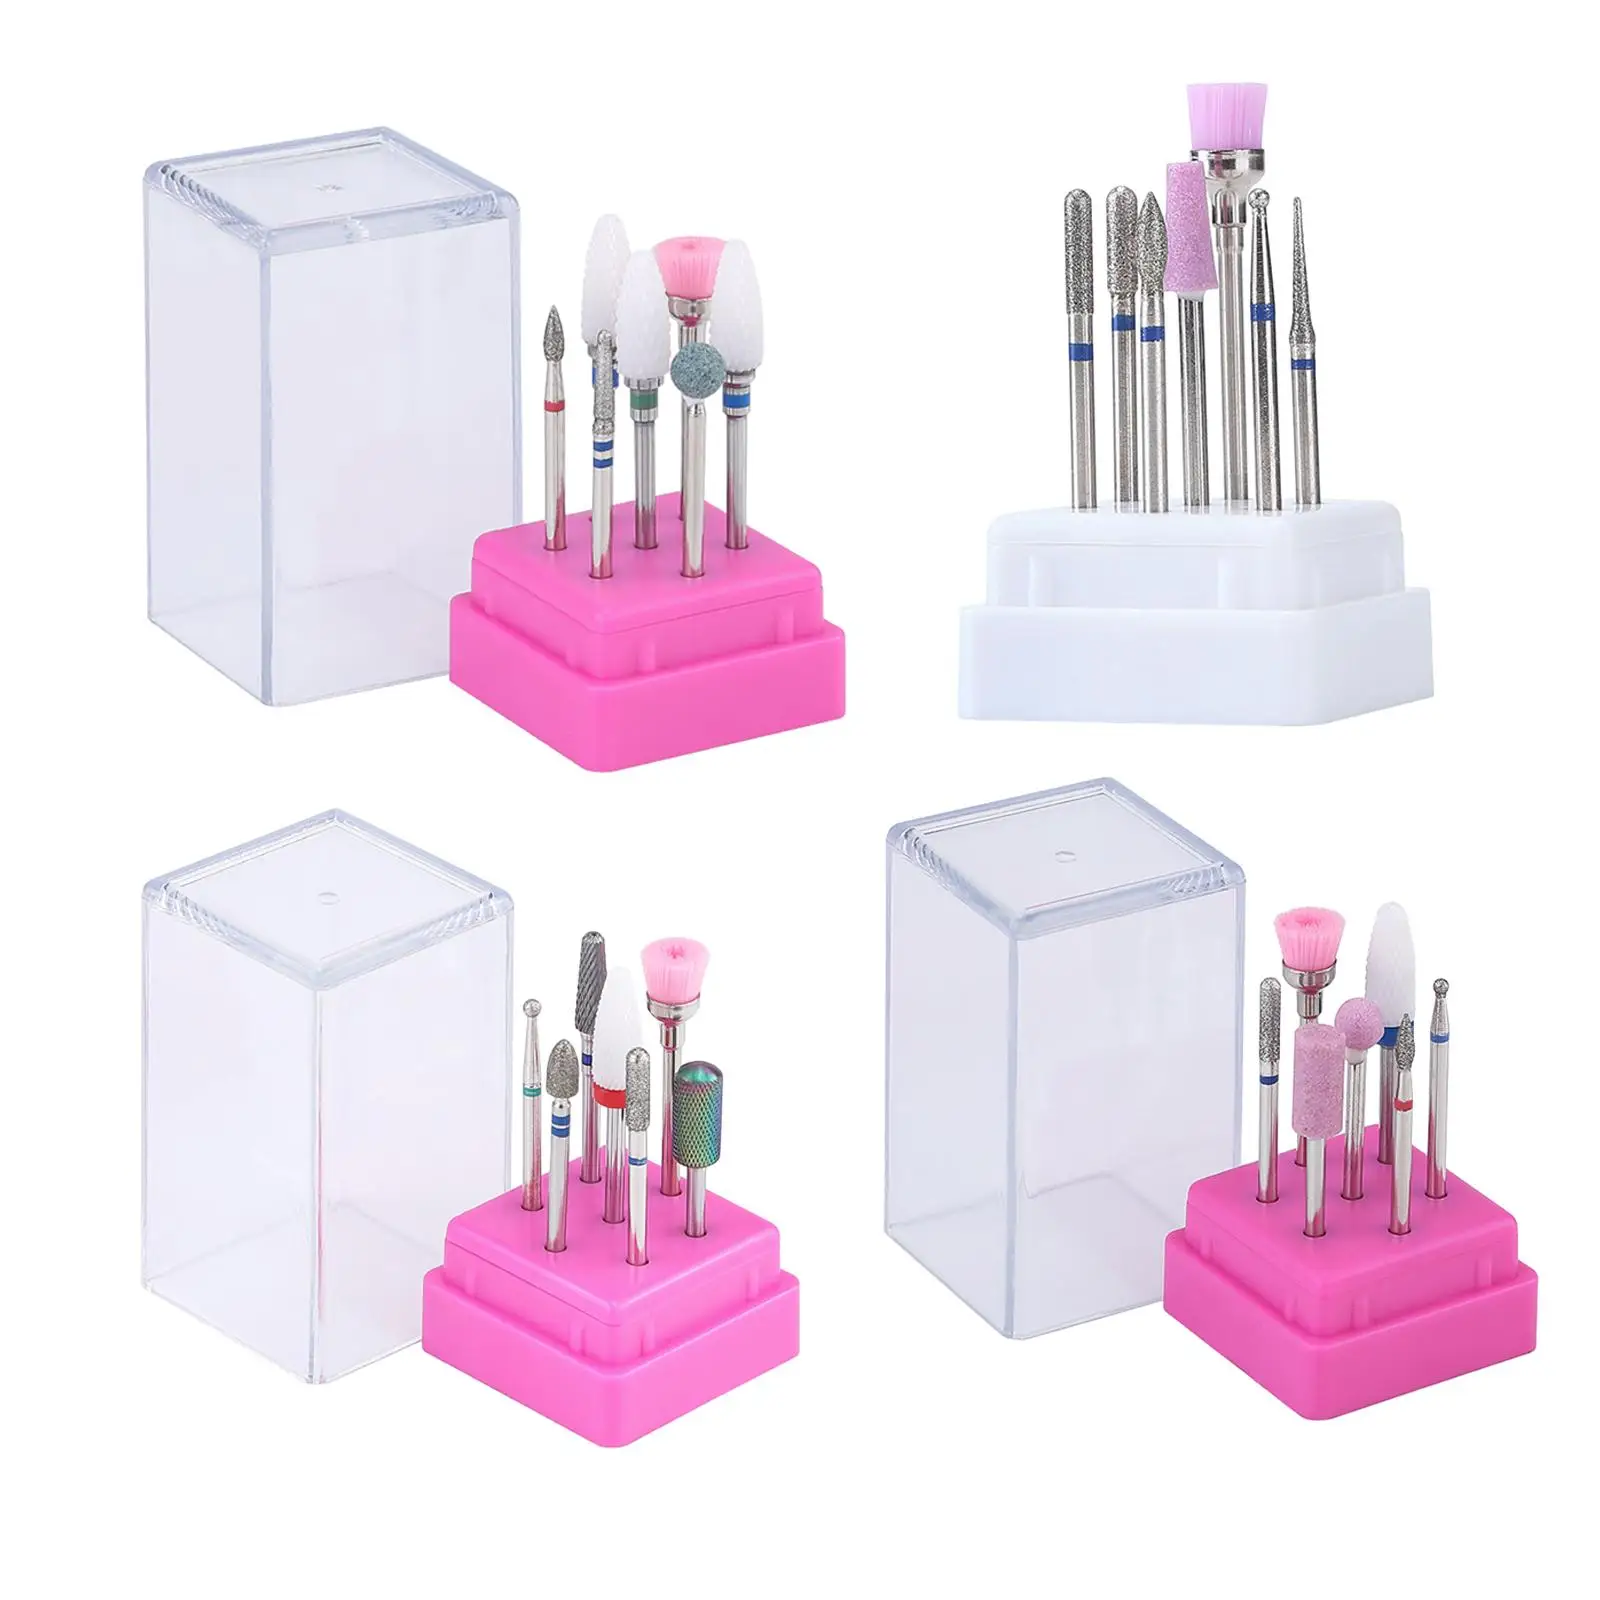 Electric Nail Drill Bits Set with Holder Box Portable 7Pcs Nail Polishing Head Set for Smooth Sculpt Cleaning Care Professionals